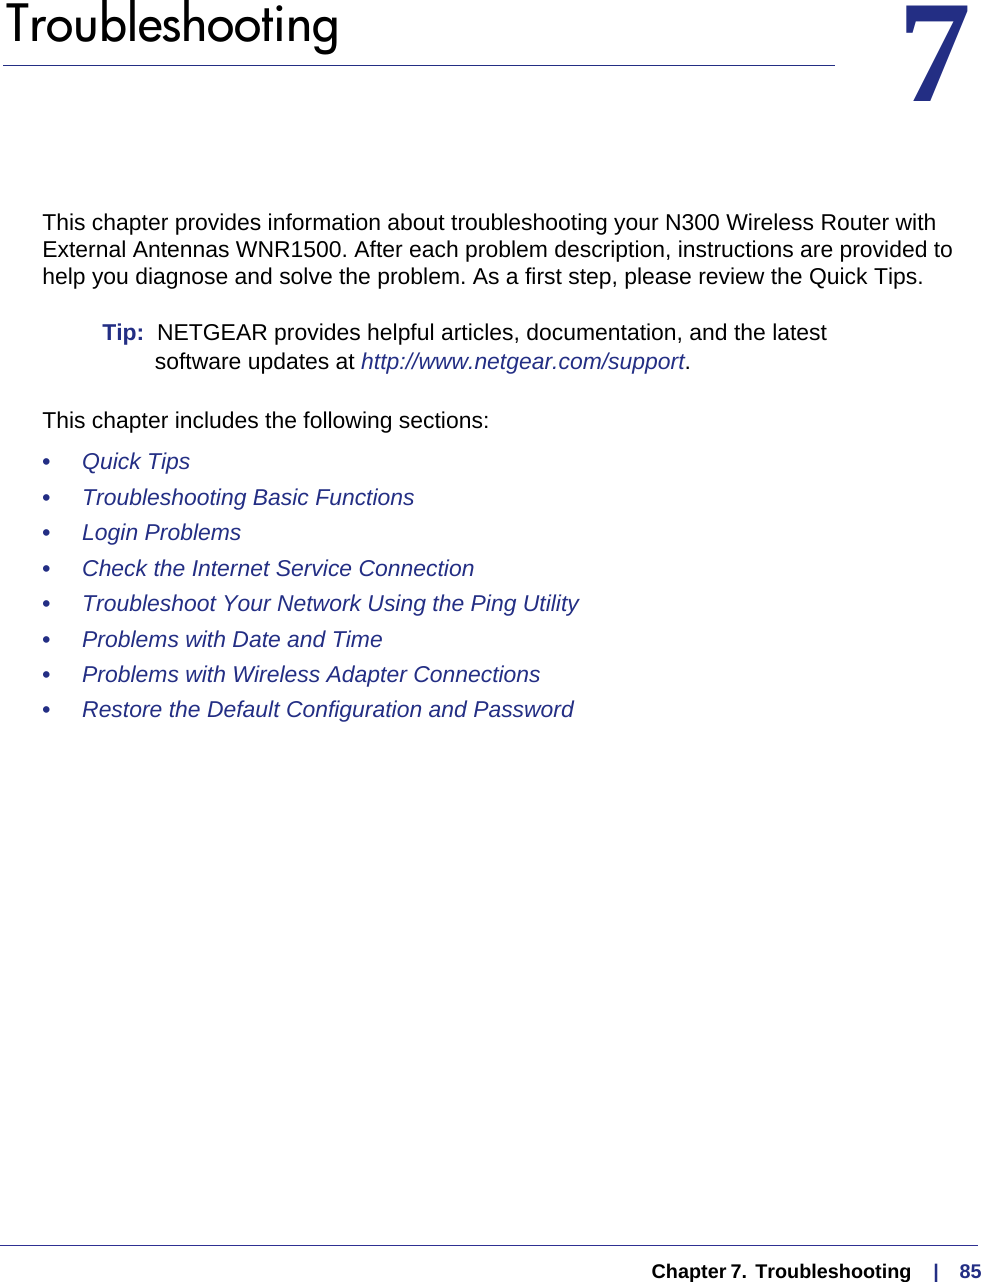   Chapter 7.  Troubleshooting     |    8577.   TroubleshootingThis chapter provides information about troubleshooting your N300 Wireless Router with External Antennas WNR1500. After each problem description, instructions are provided to help you diagnose and solve the problem. As a first step, please review the Quick Tips.Tip:  NETGEAR provides helpful articles, documentation, and the latest software updates at http://www.netgear.com/support.This chapter includes the following sections:•     Quick Tips •     Troubleshooting Basic Functions •     Login Problems •     Check the Internet Service Connection •     Troubleshoot Your Network Using the Ping Utility •     Problems with Date and Time •     Problems with Wireless Adapter Connections •     Restore the Default Configuration and Password 